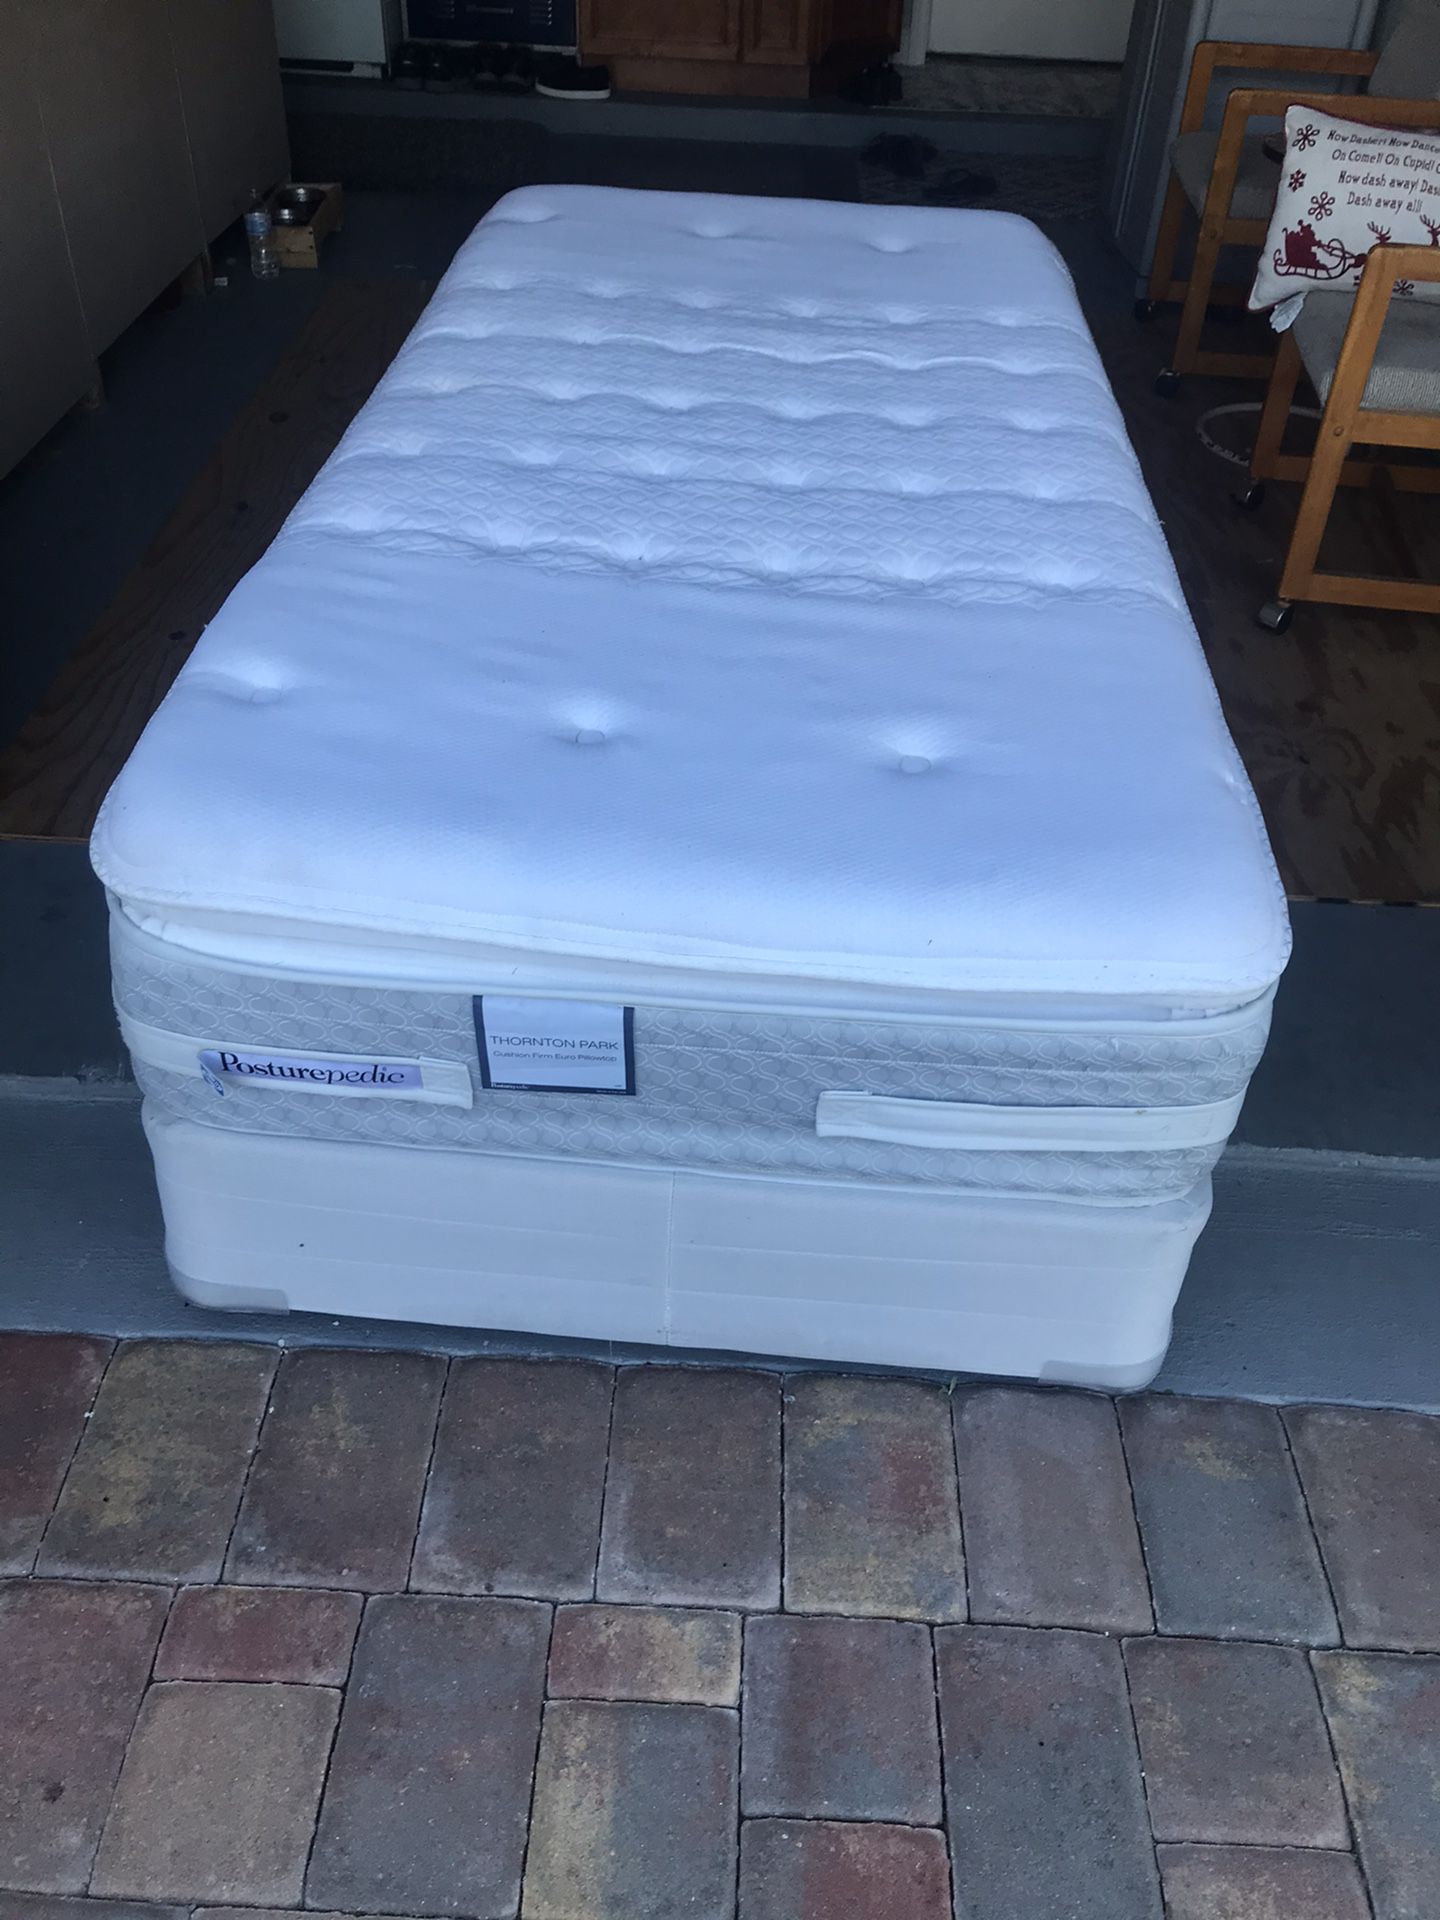 Sealy Posturepedic twin size mattress pillow top and box spring set XL